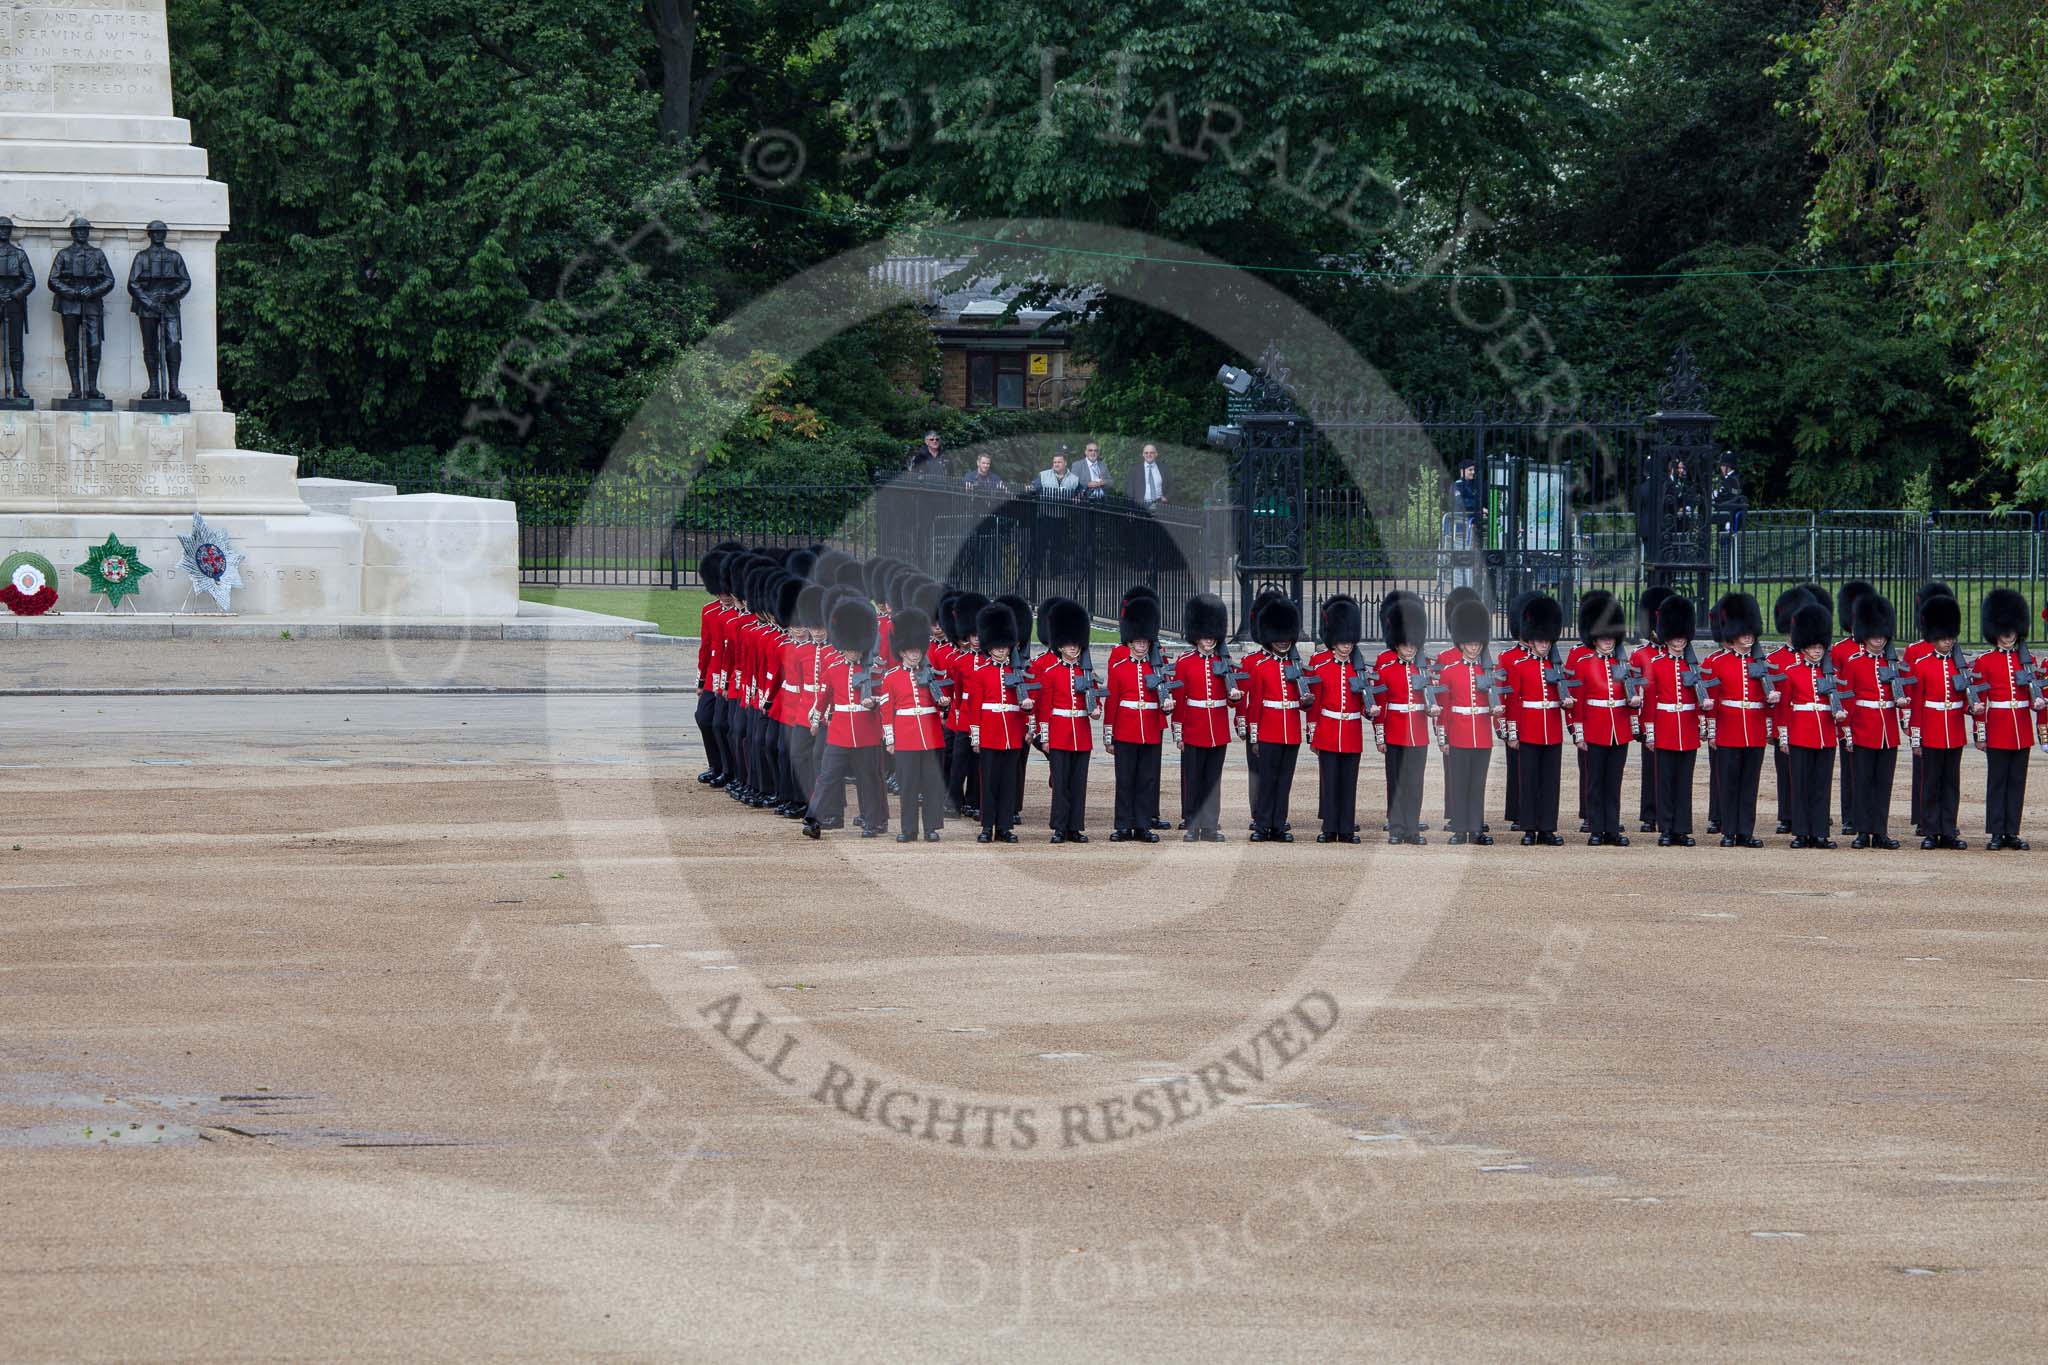 Trooping the Colour 2012: The Guards Divisions are changing their positions to form a long, L-shaped double row of guardsmen..
Horse Guards Parade, Westminster,
London SW1,

United Kingdom,
on 16 June 2012 at 10:35, image #87